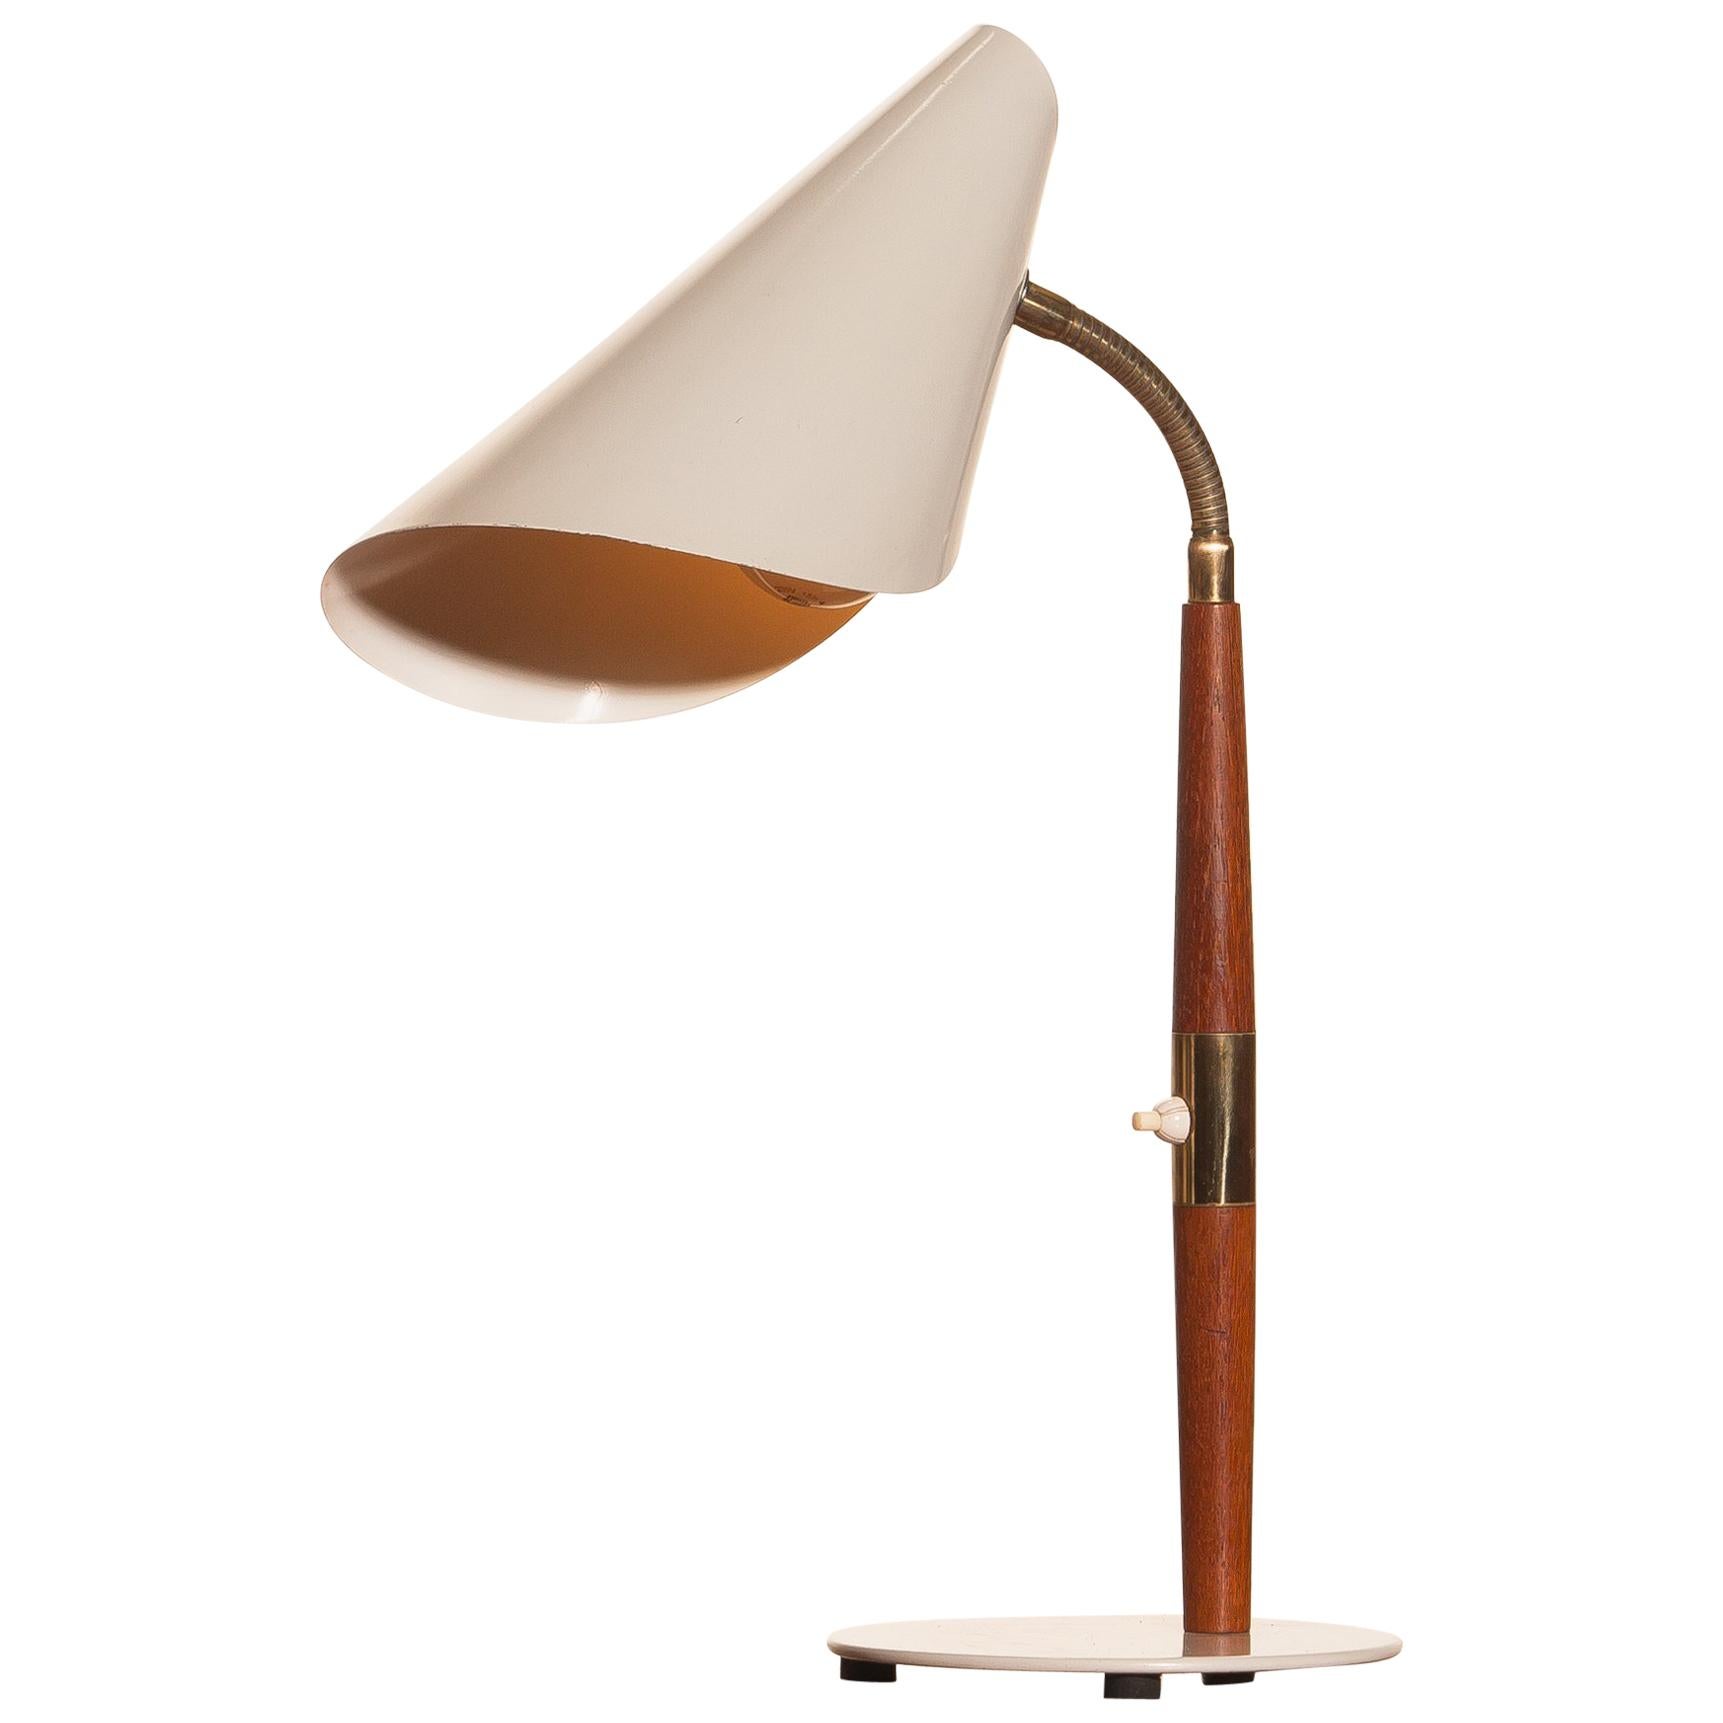 1960s, Off-White with Teak and Brass Elements Desk or Table Lamp by Karlskrona In Good Condition In Silvolde, Gelderland